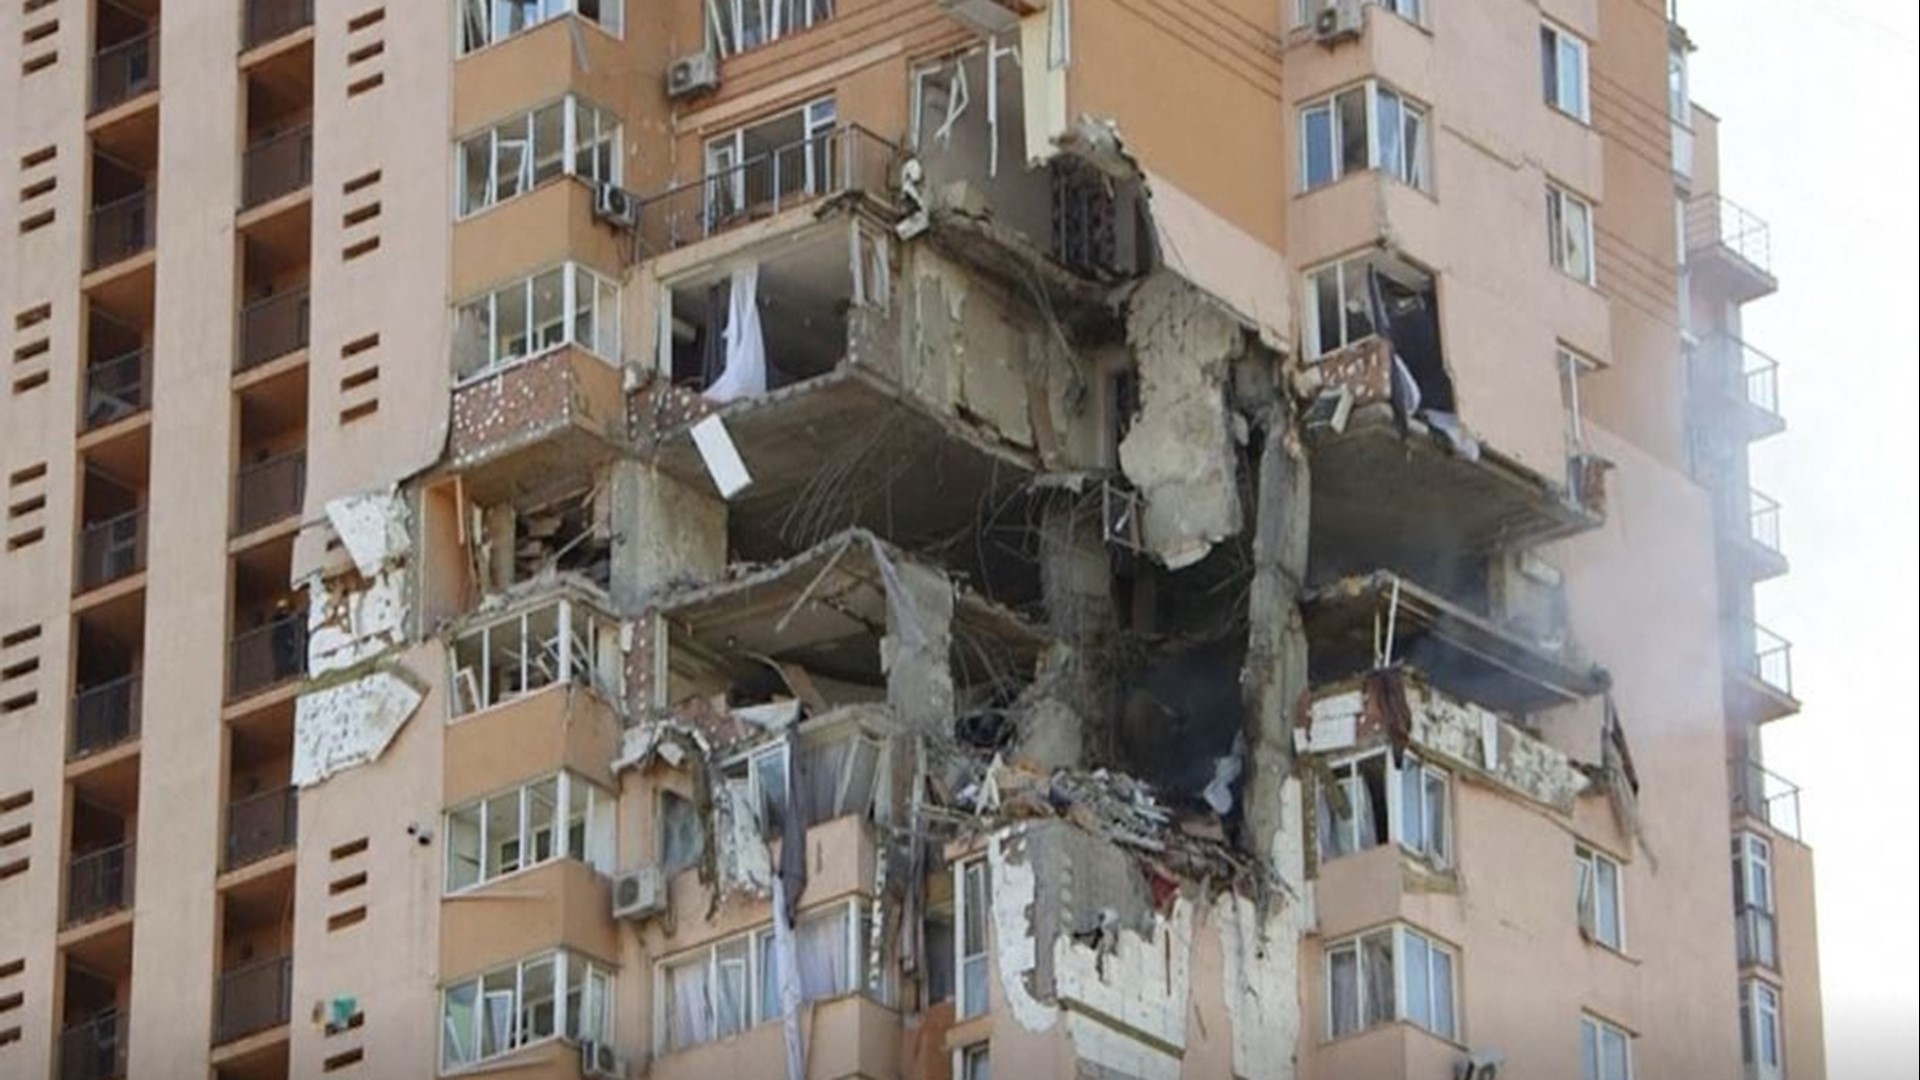 The mayor of Kyiv said a missile hit an apartment building near the airport Saturday. No casualties were immediately reported.